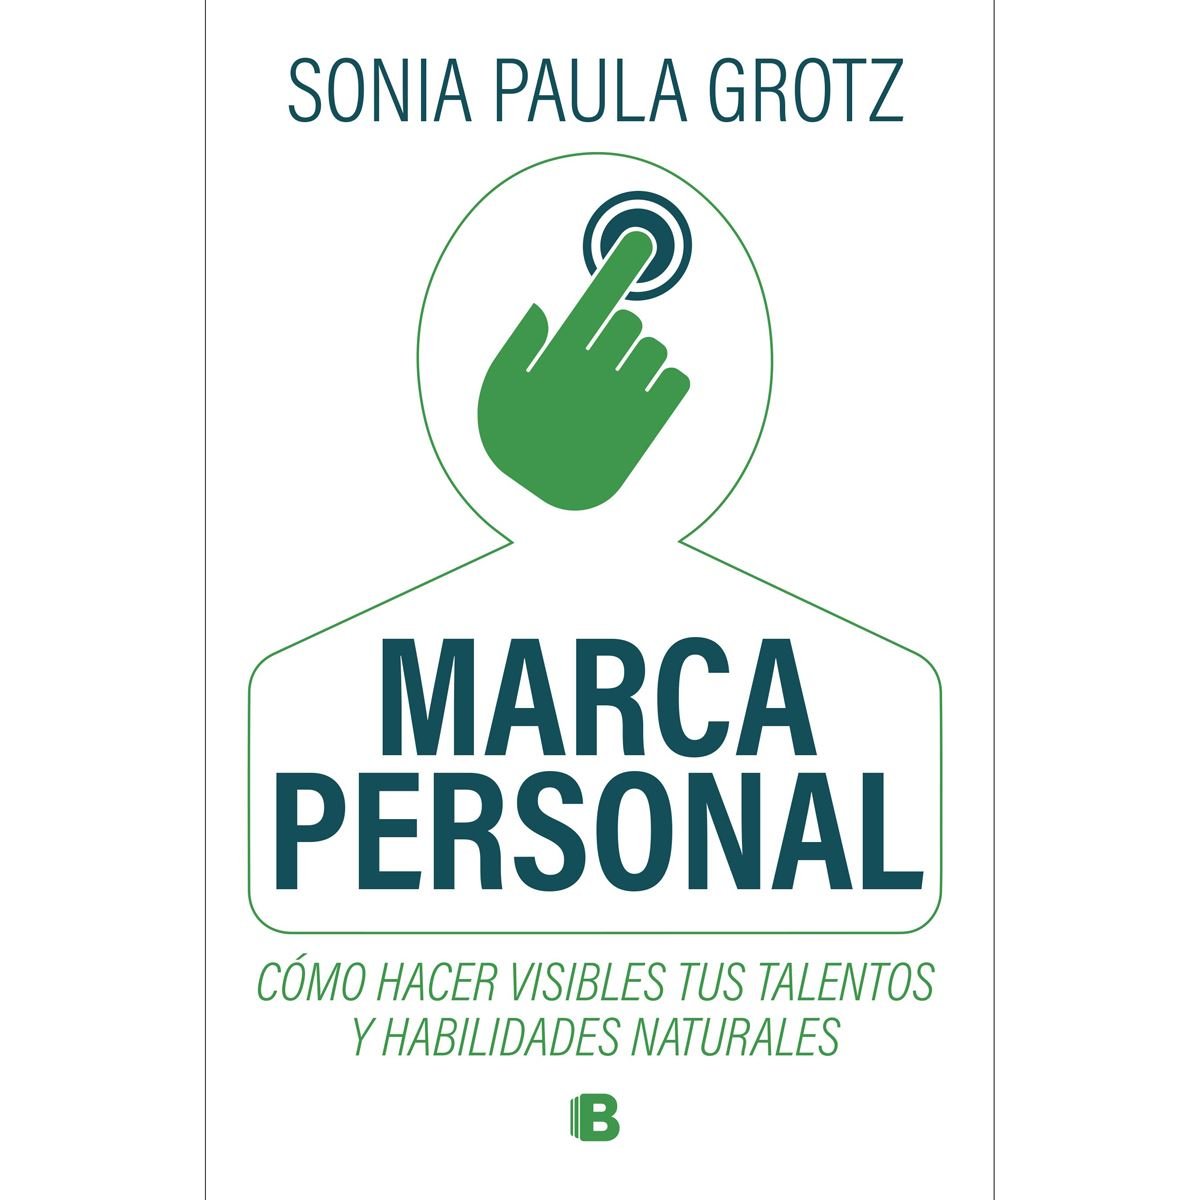 Marca personal